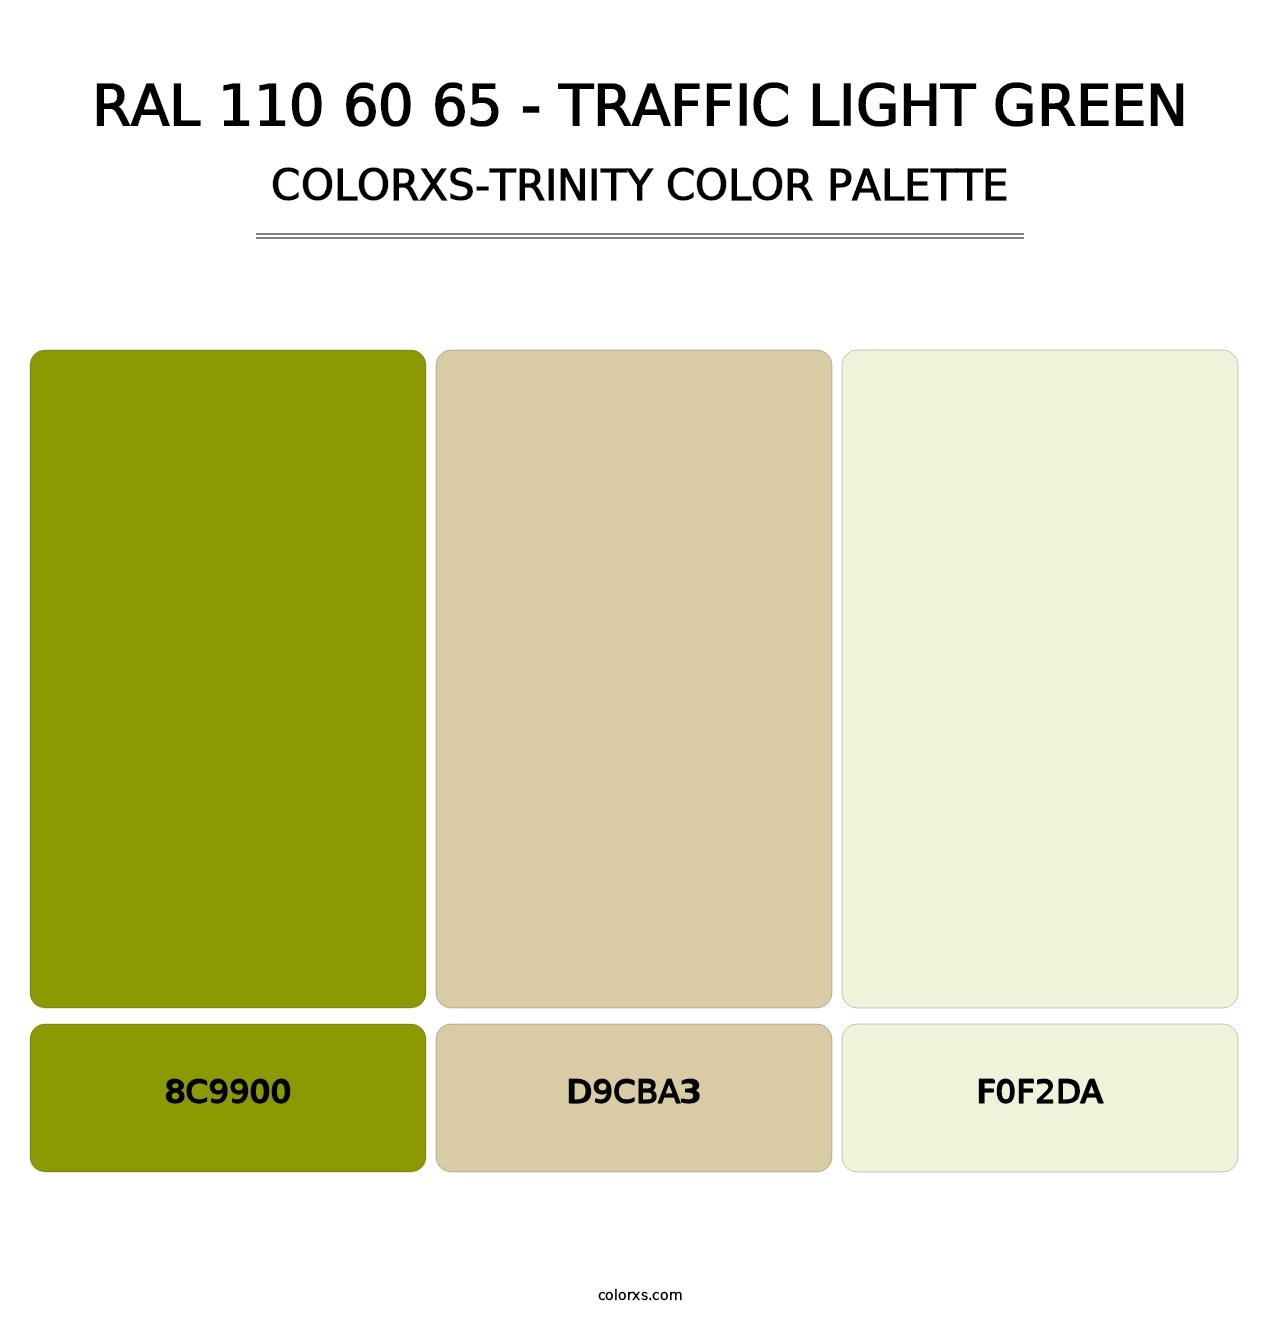 RAL 110 60 65 - Traffic Light Green - Colorxs Trinity Palette